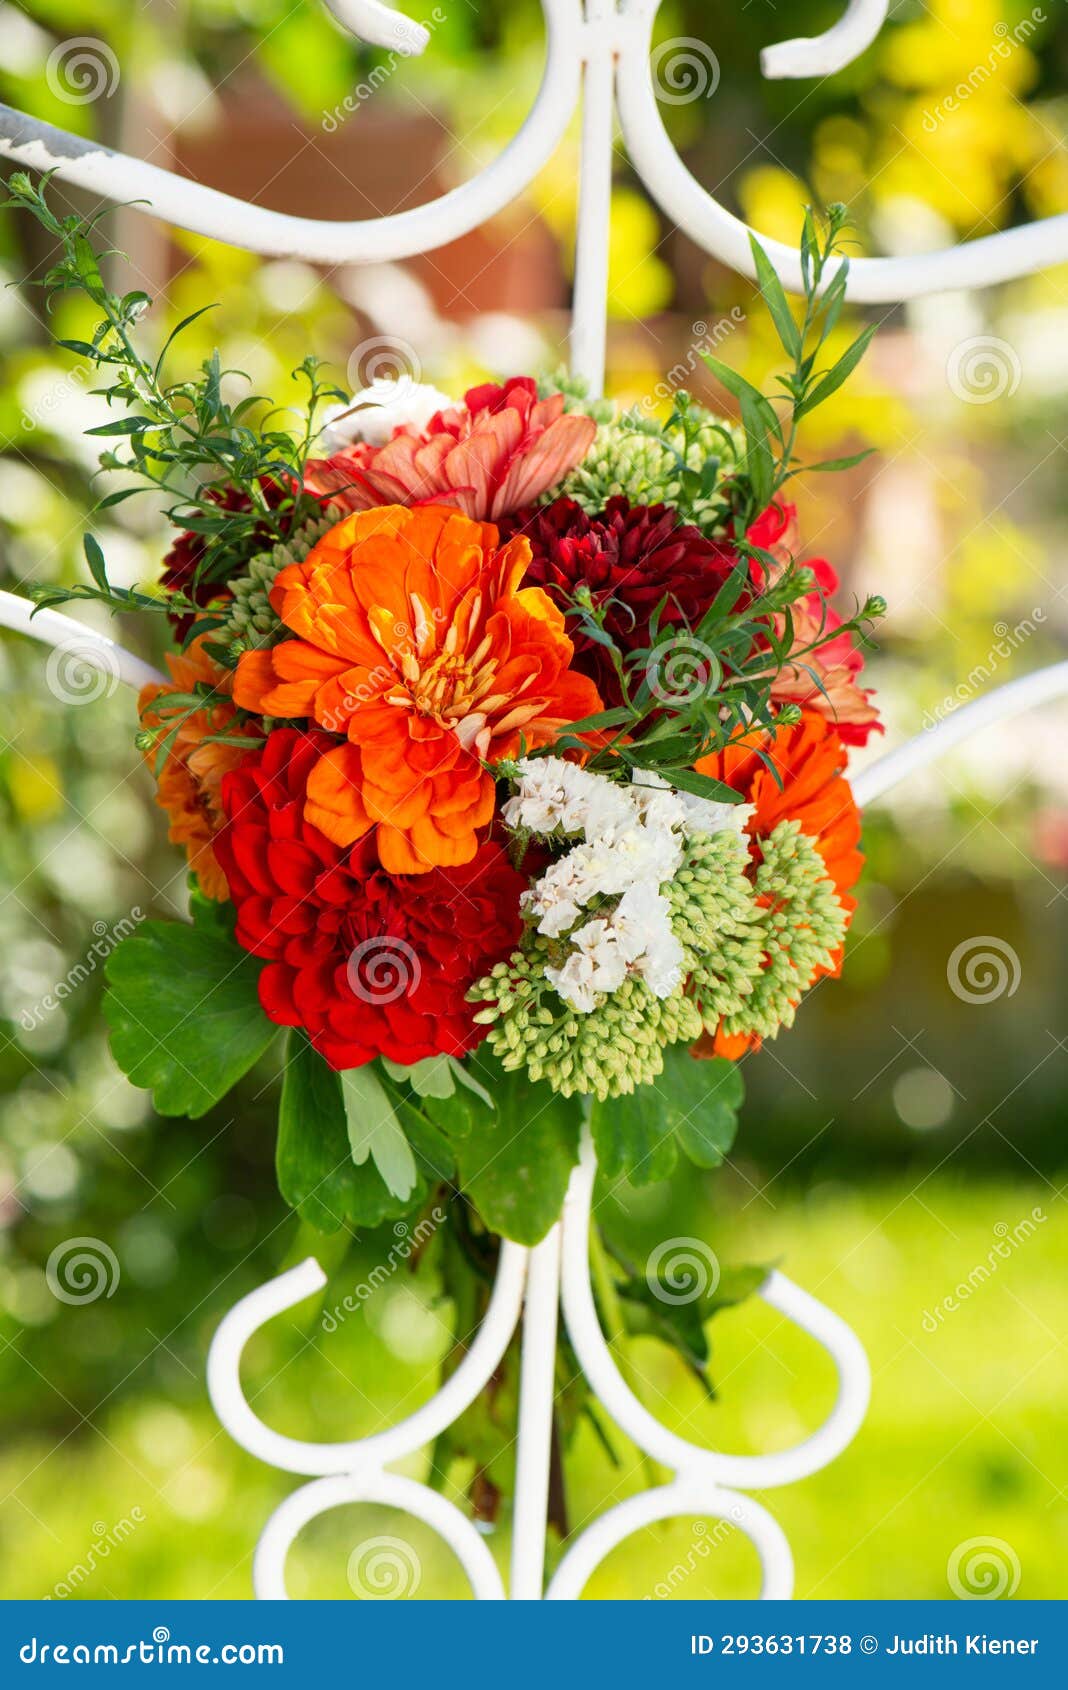 colorful flower bouquet with dalias on a trellis